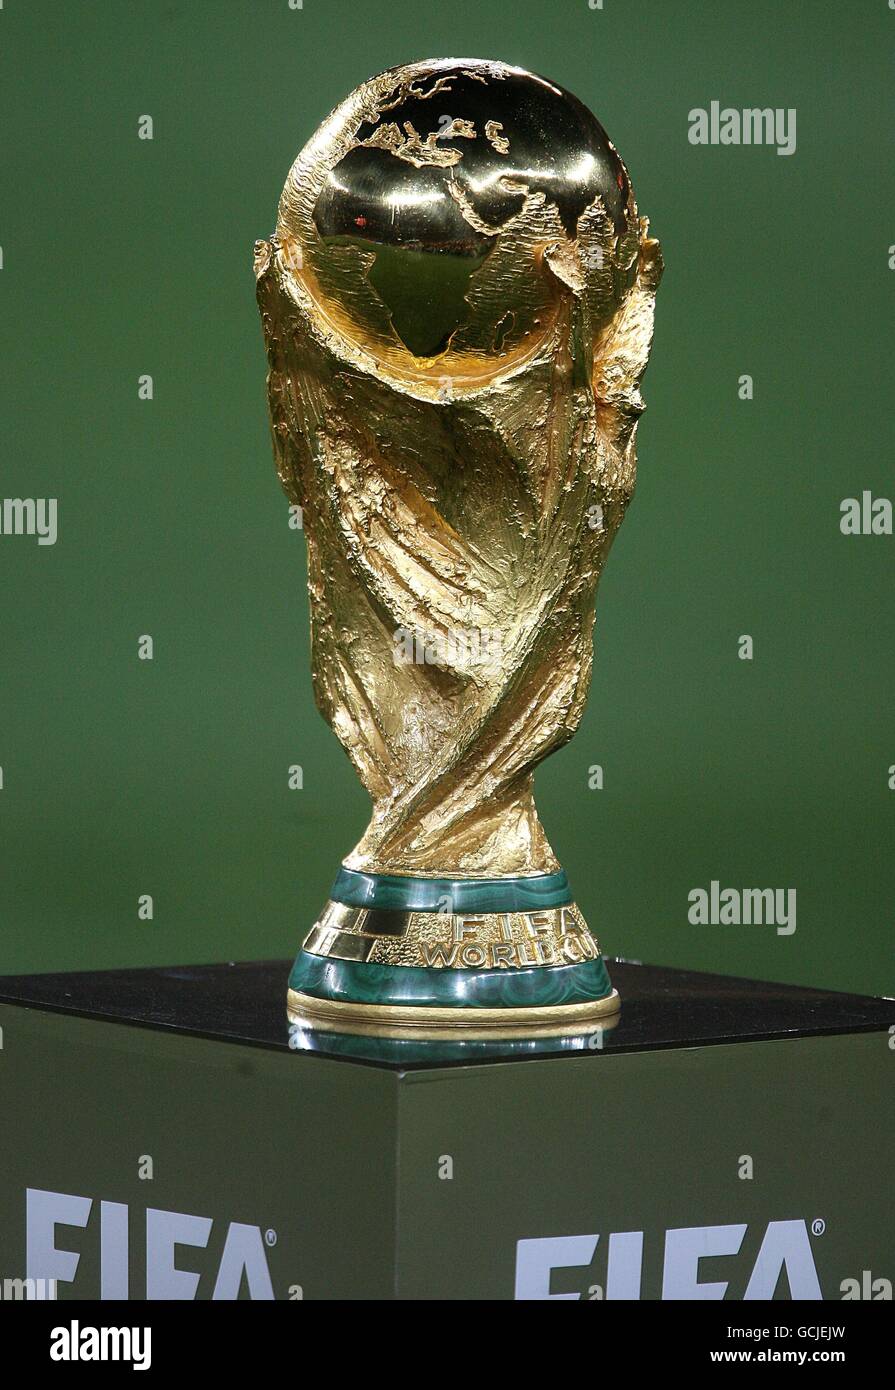 Former Germany captain Philipp Lahm and Natalia Vodianova place the world  cup trophy on a plinth prior to the FIFA World Cup Final at the Luzhniki  Stadium, Moscow Stock Photo - Alamy